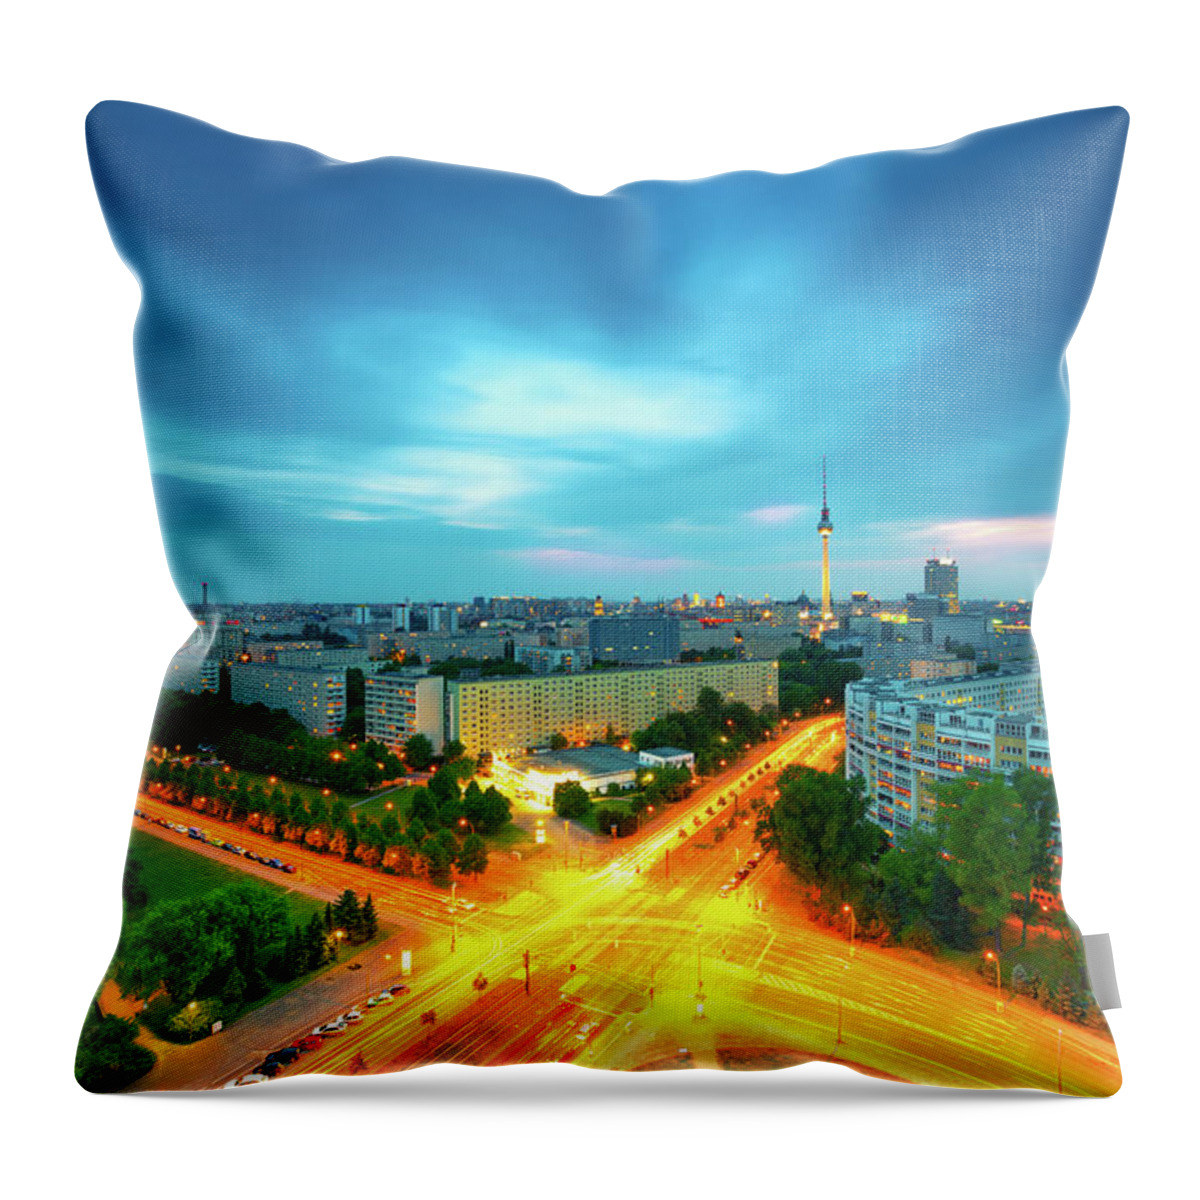 Berlin Throw Pillow featuring the photograph Berlin Skyline Cityscape With Traffic by Matthias Makarinus